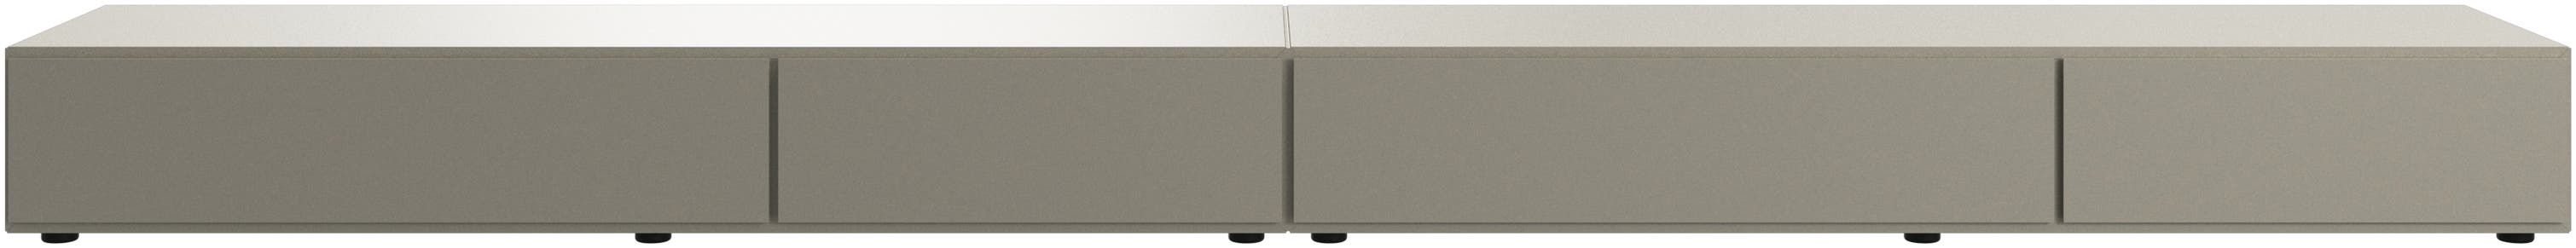 Lugano base cabinet with drawers and drop down doors